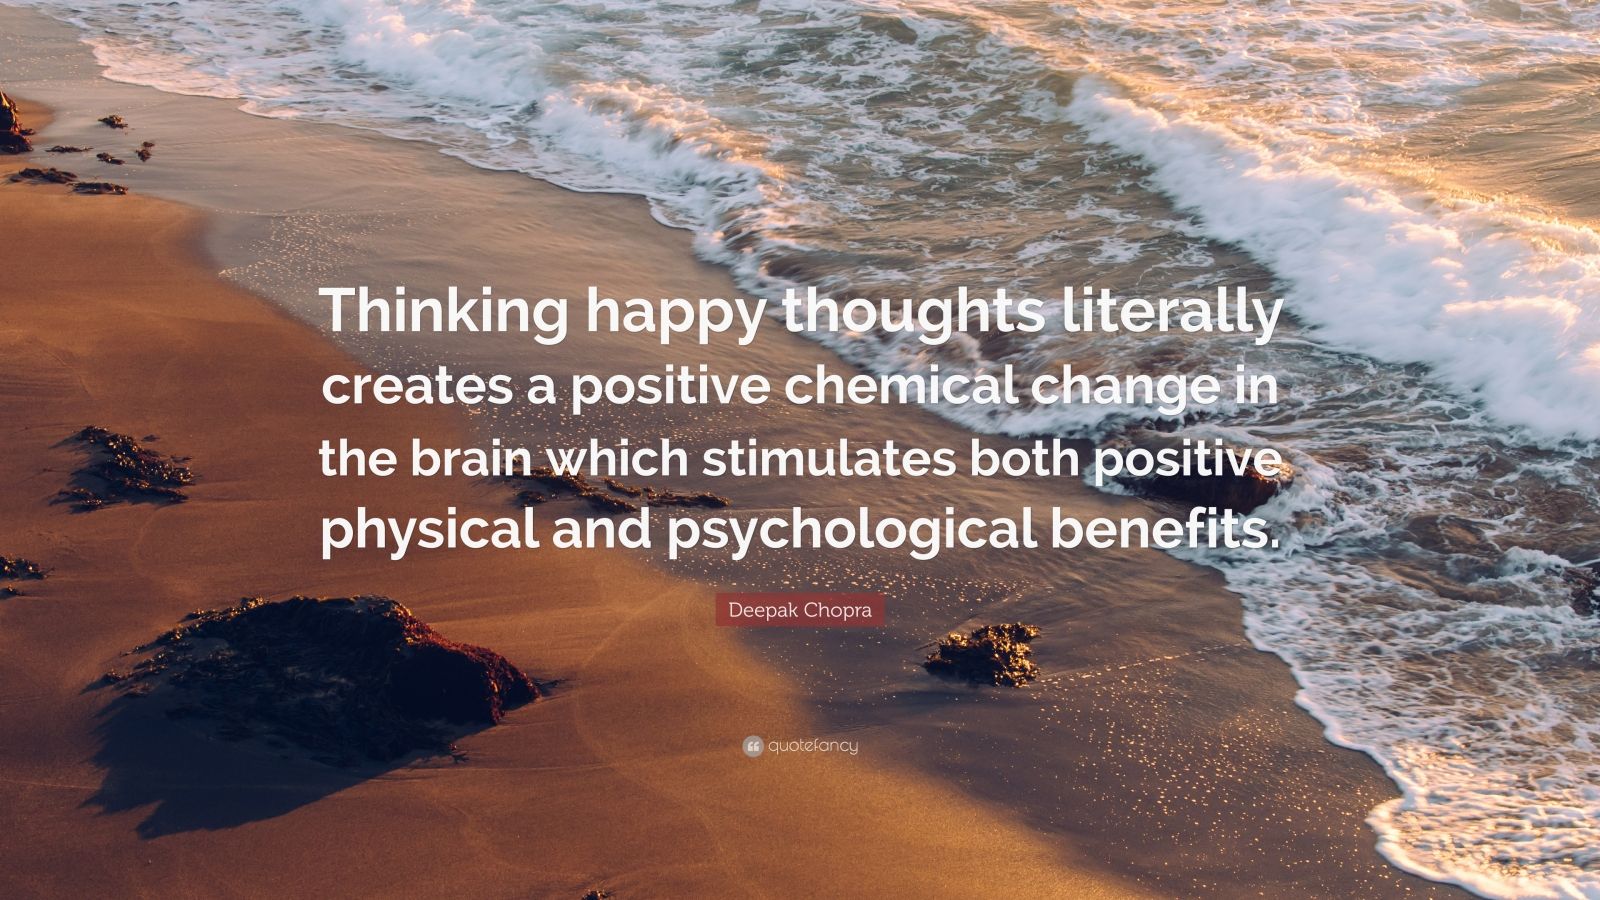 Deepak Chopra Quote: “Thinking happy thoughts literally creates a positive  chemical change in the brain which stimulates both positive physica”